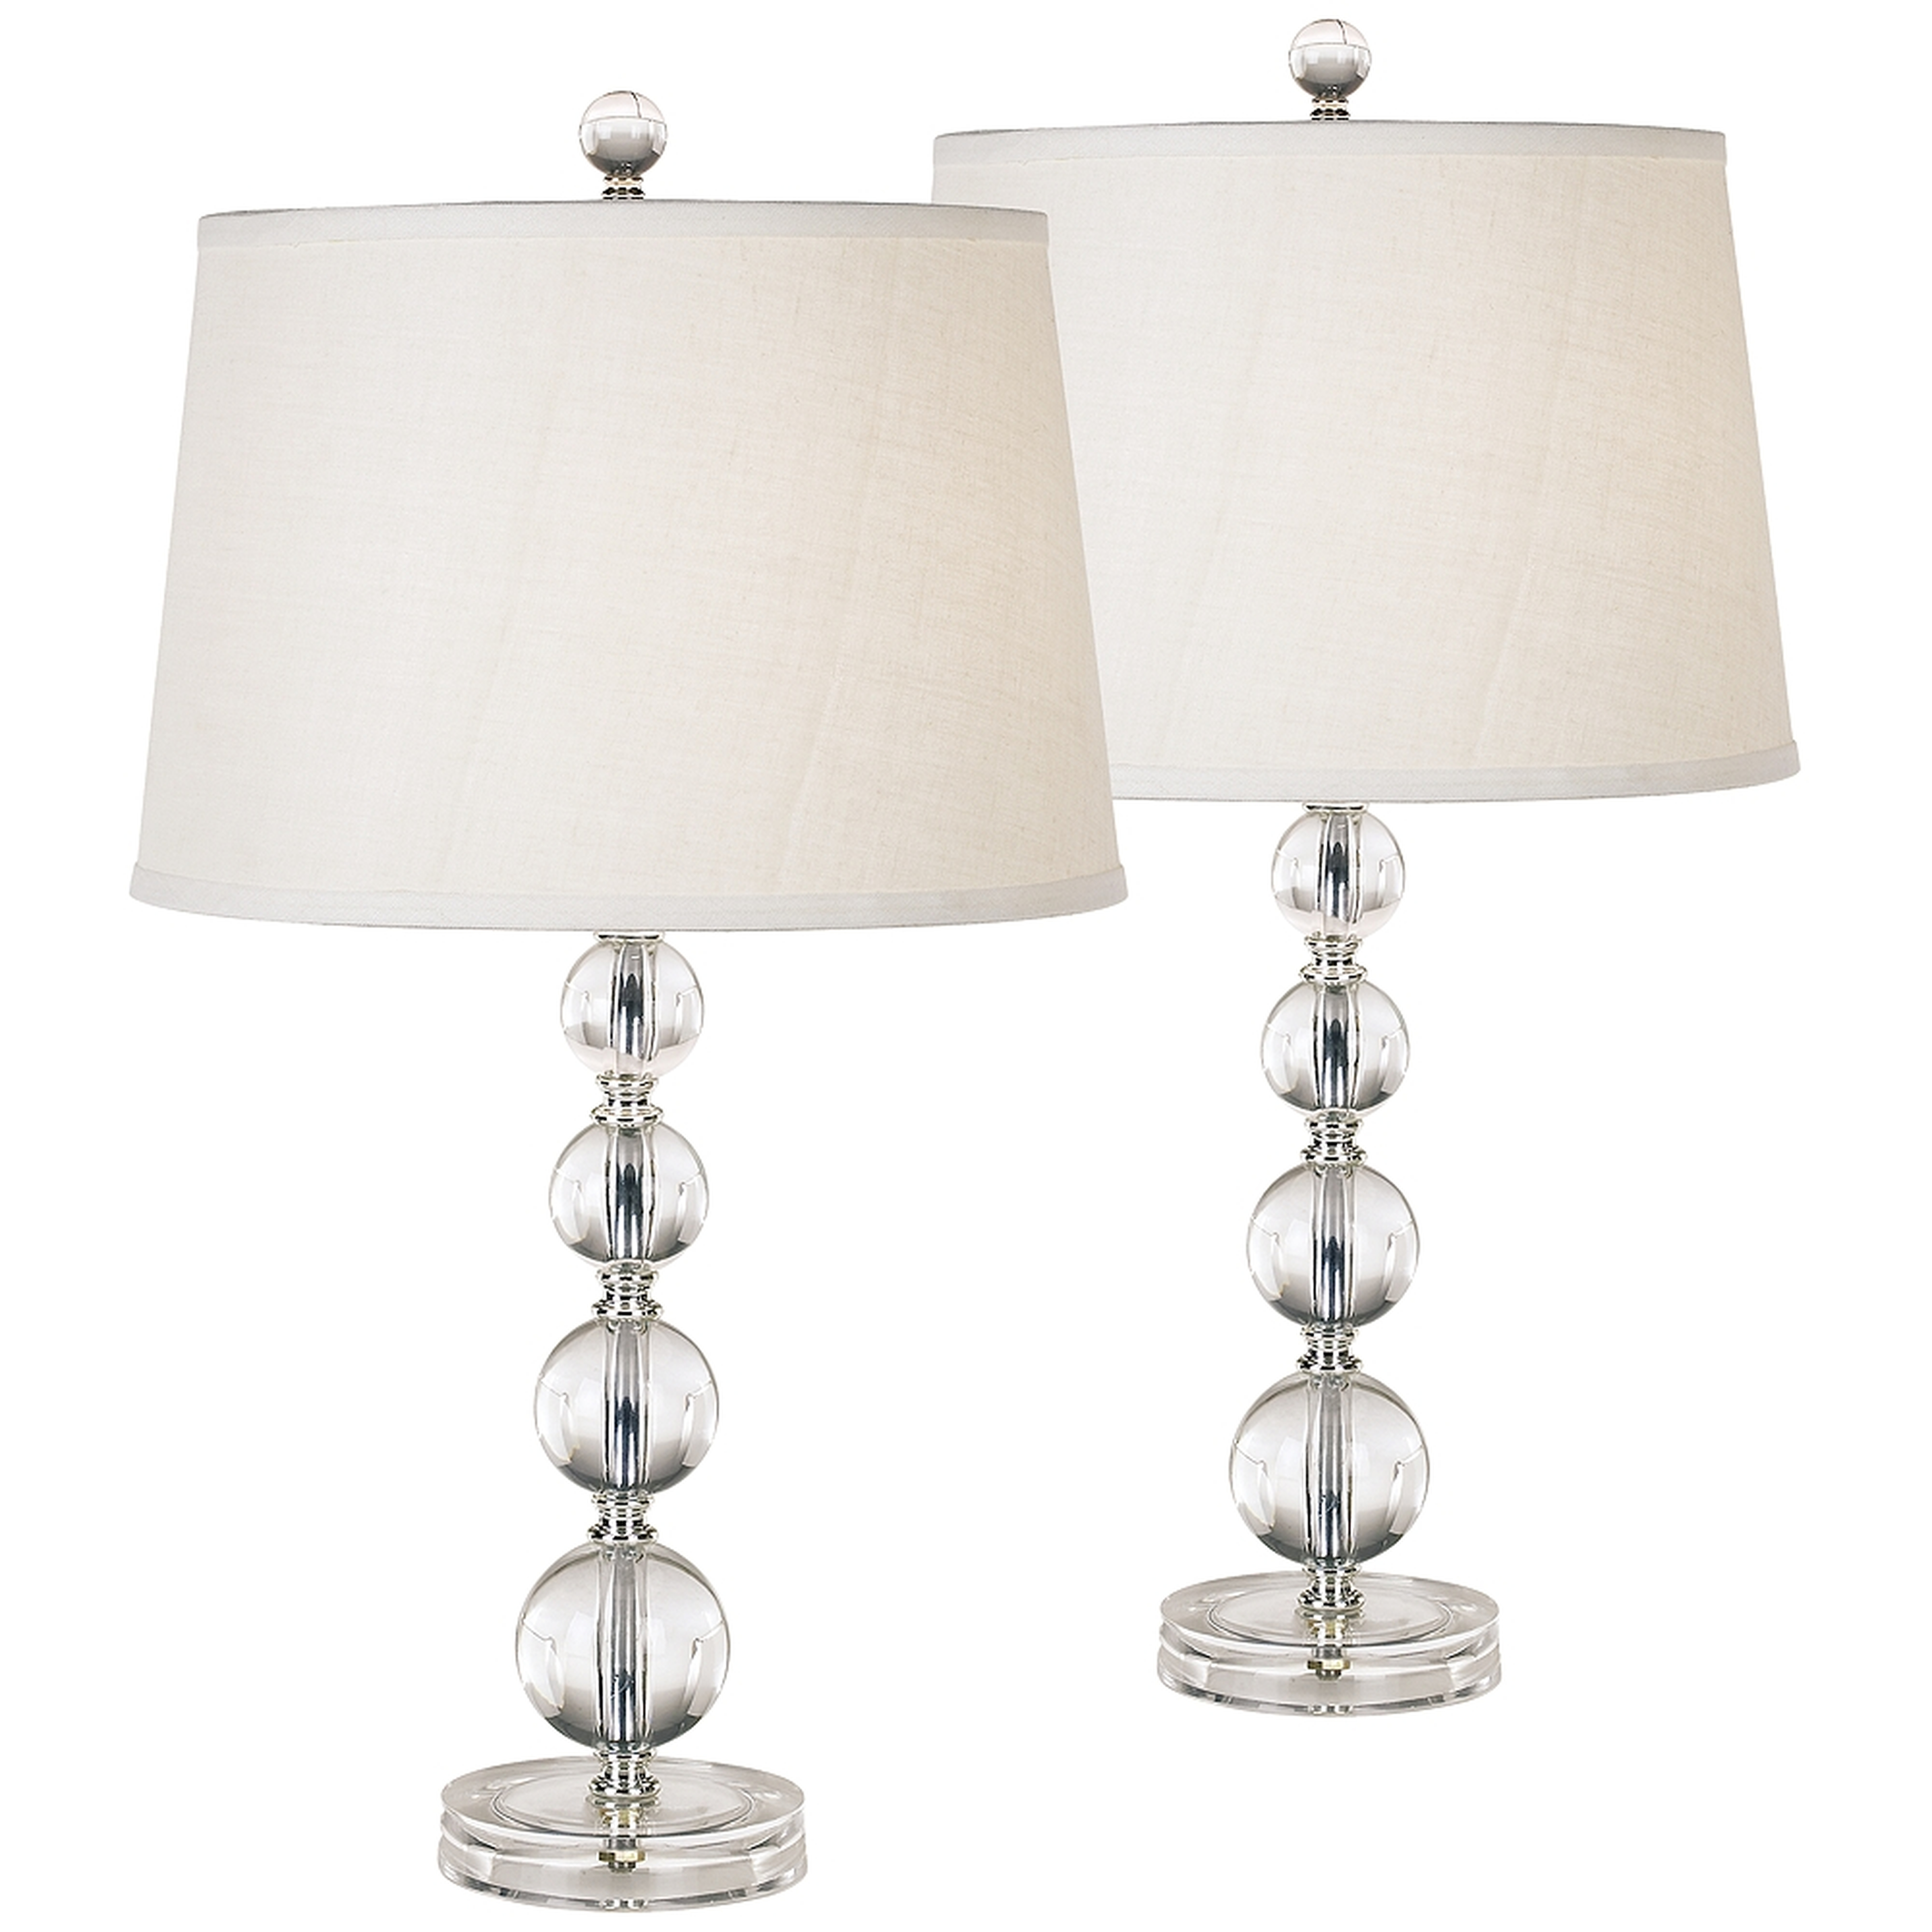 Herminie Stacked Ball Acrylic Table Lamp Set of 2 - Style # 17P76 - Lamps Plus